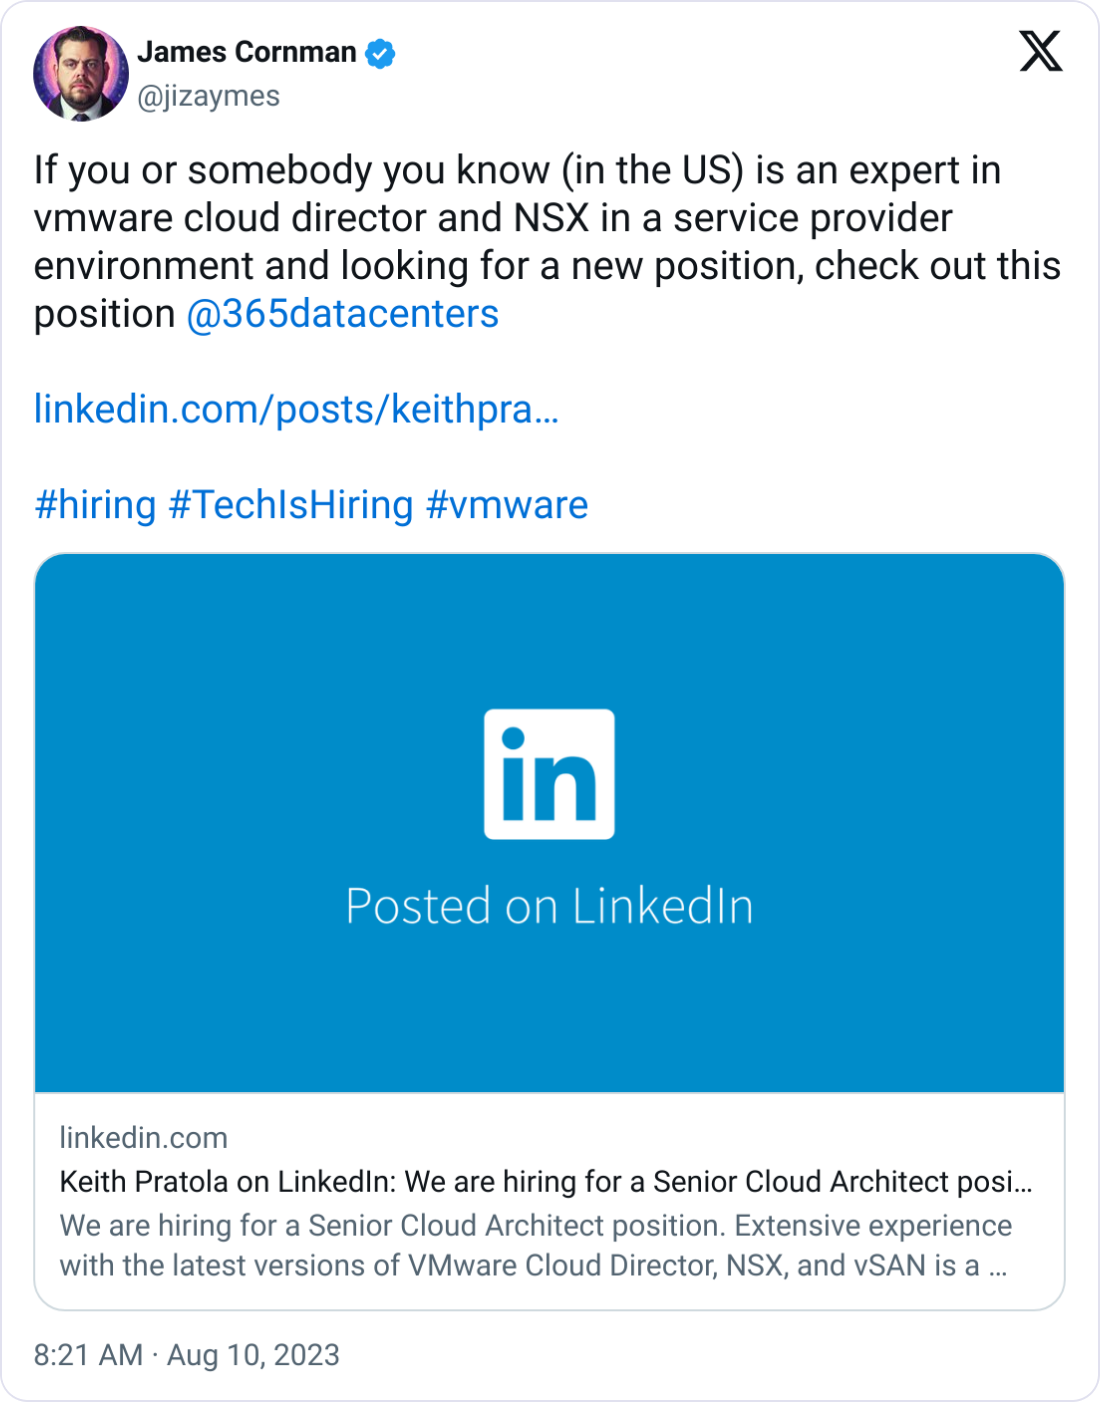 James Cornman @jizaymes If you or somebody you know (in the US) is an expert in vmware cloud director and NSX in a service provider environment and looking for a new position, check out this position  @365datacenters    https://linkedin.com/posts/keithpratola_we-are-hiring-for-a-senior-cloud-architect-activity-7095365810767978496-l0-o  #hiring #TechIsHiring #vmware